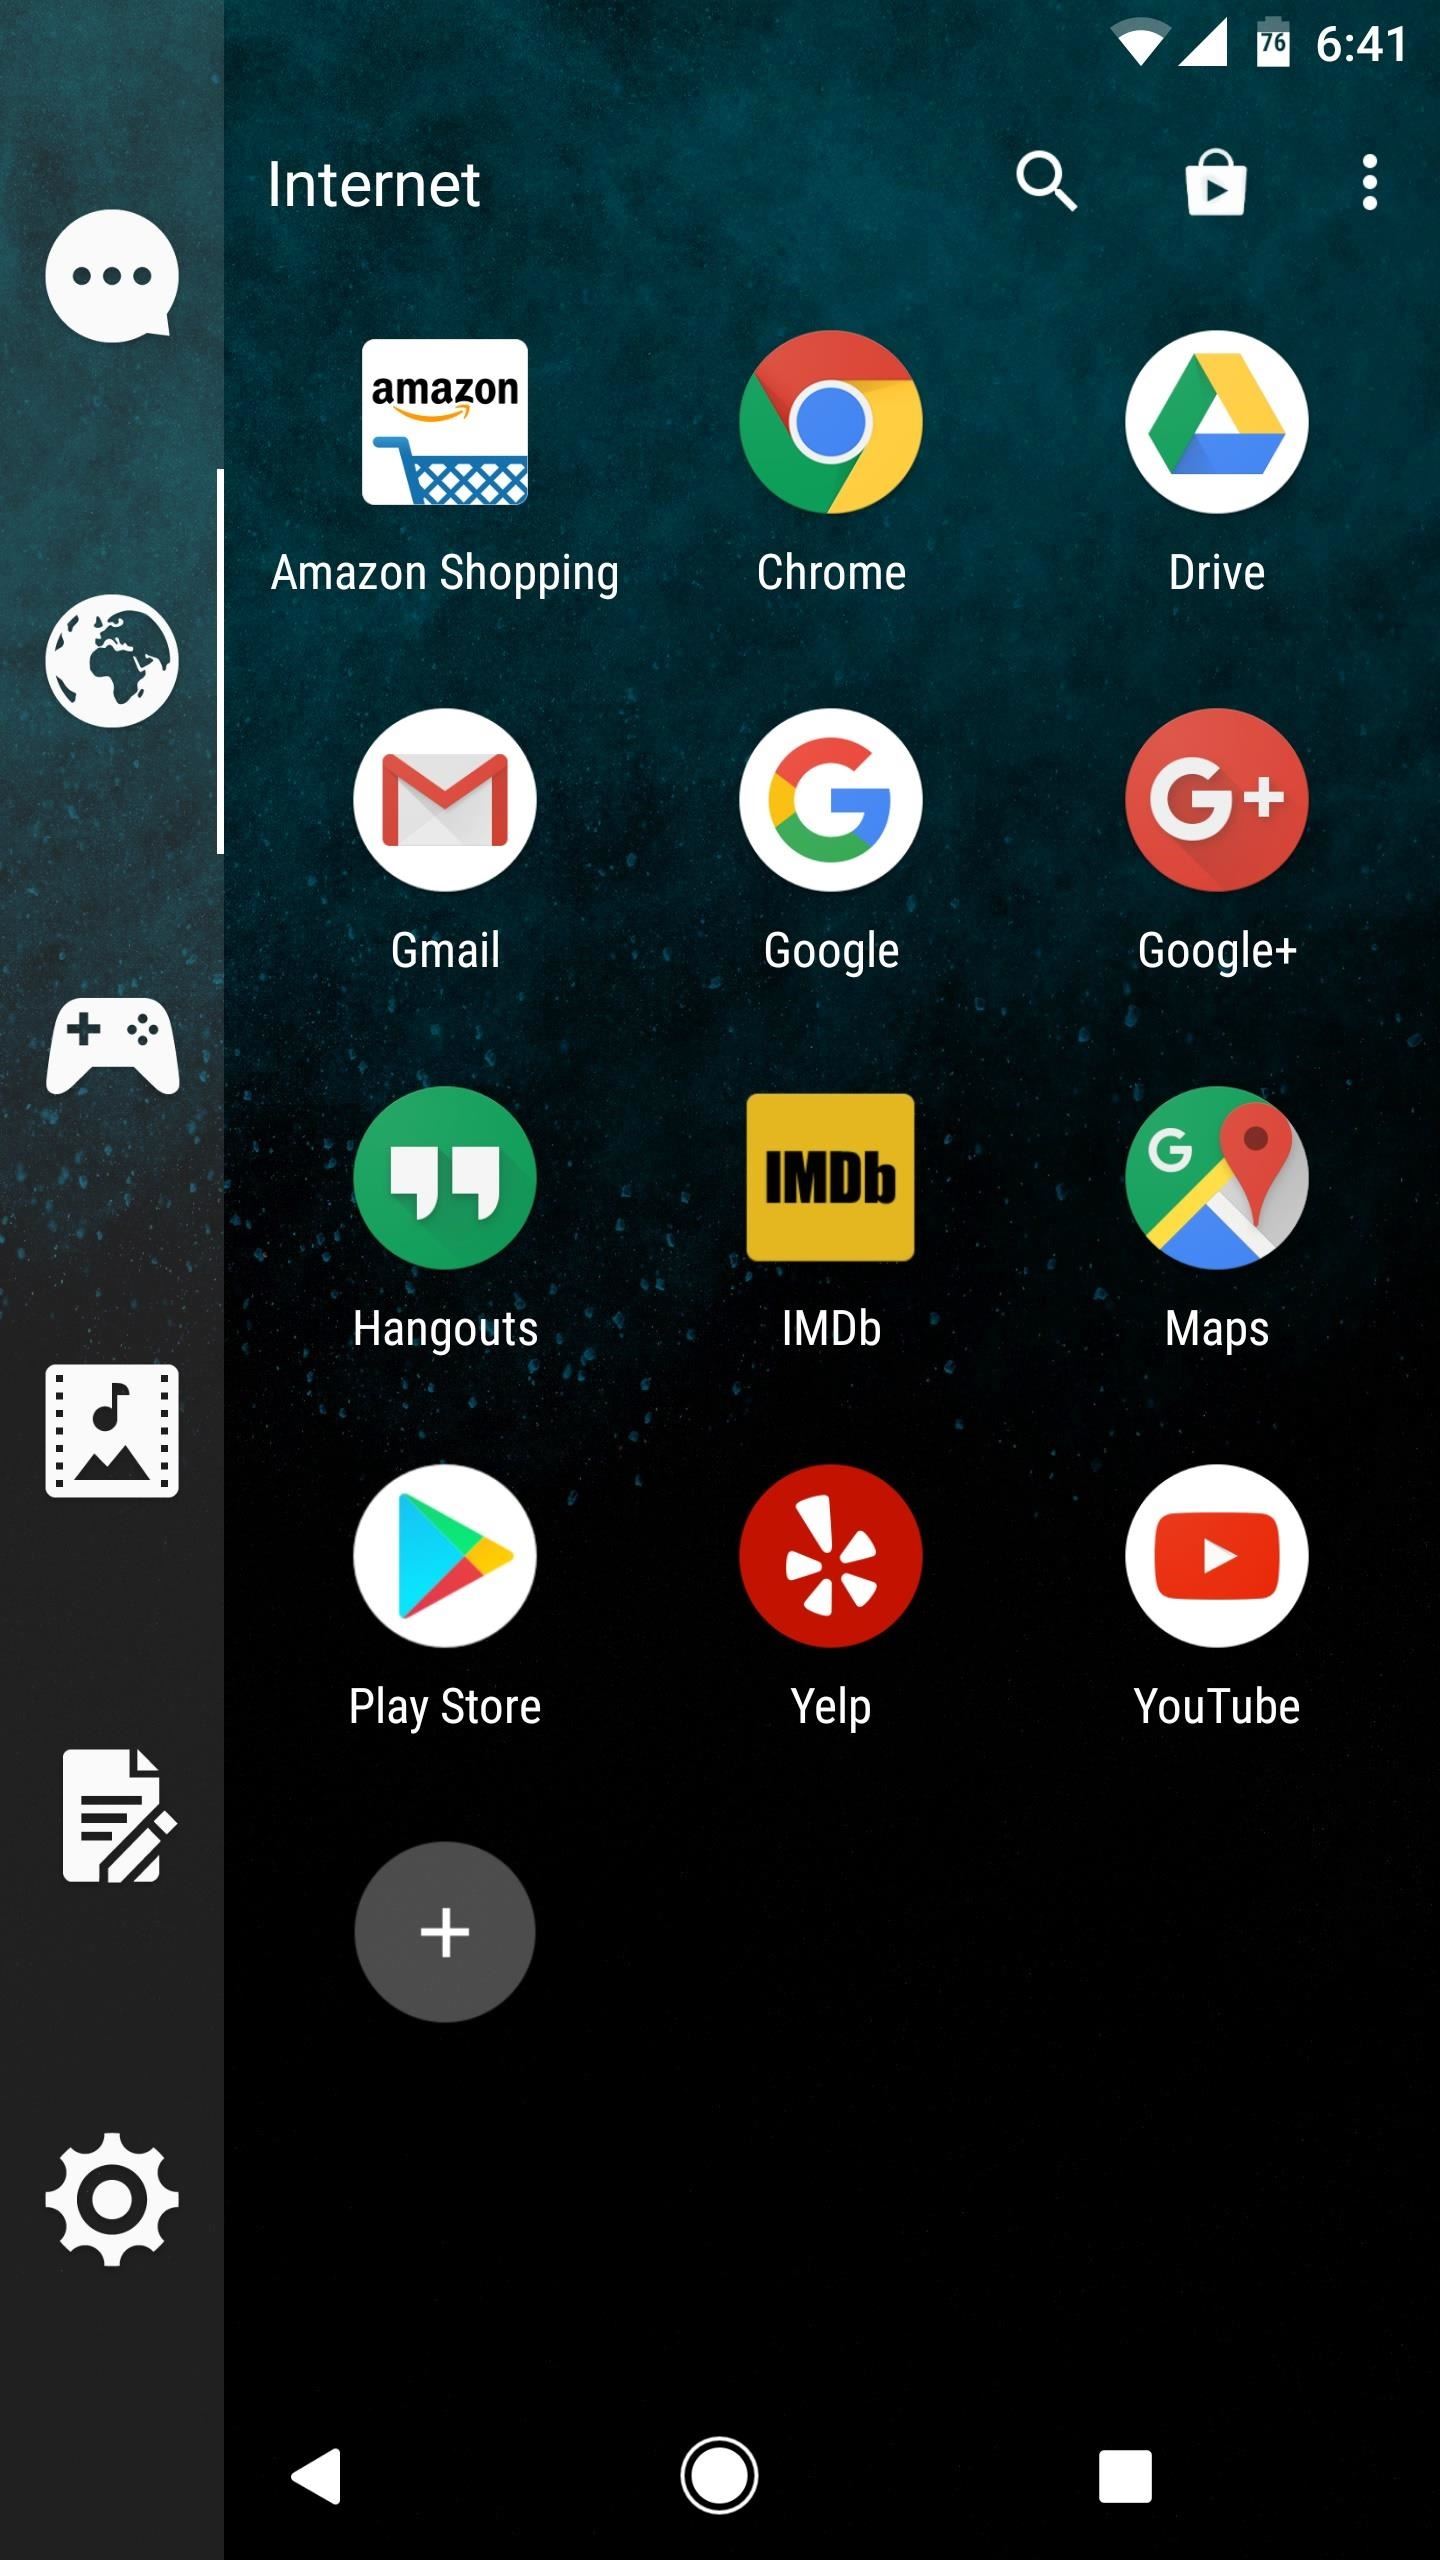 Add a Smart App Drawer to Any Launcher & Get Automatic Sorting Features